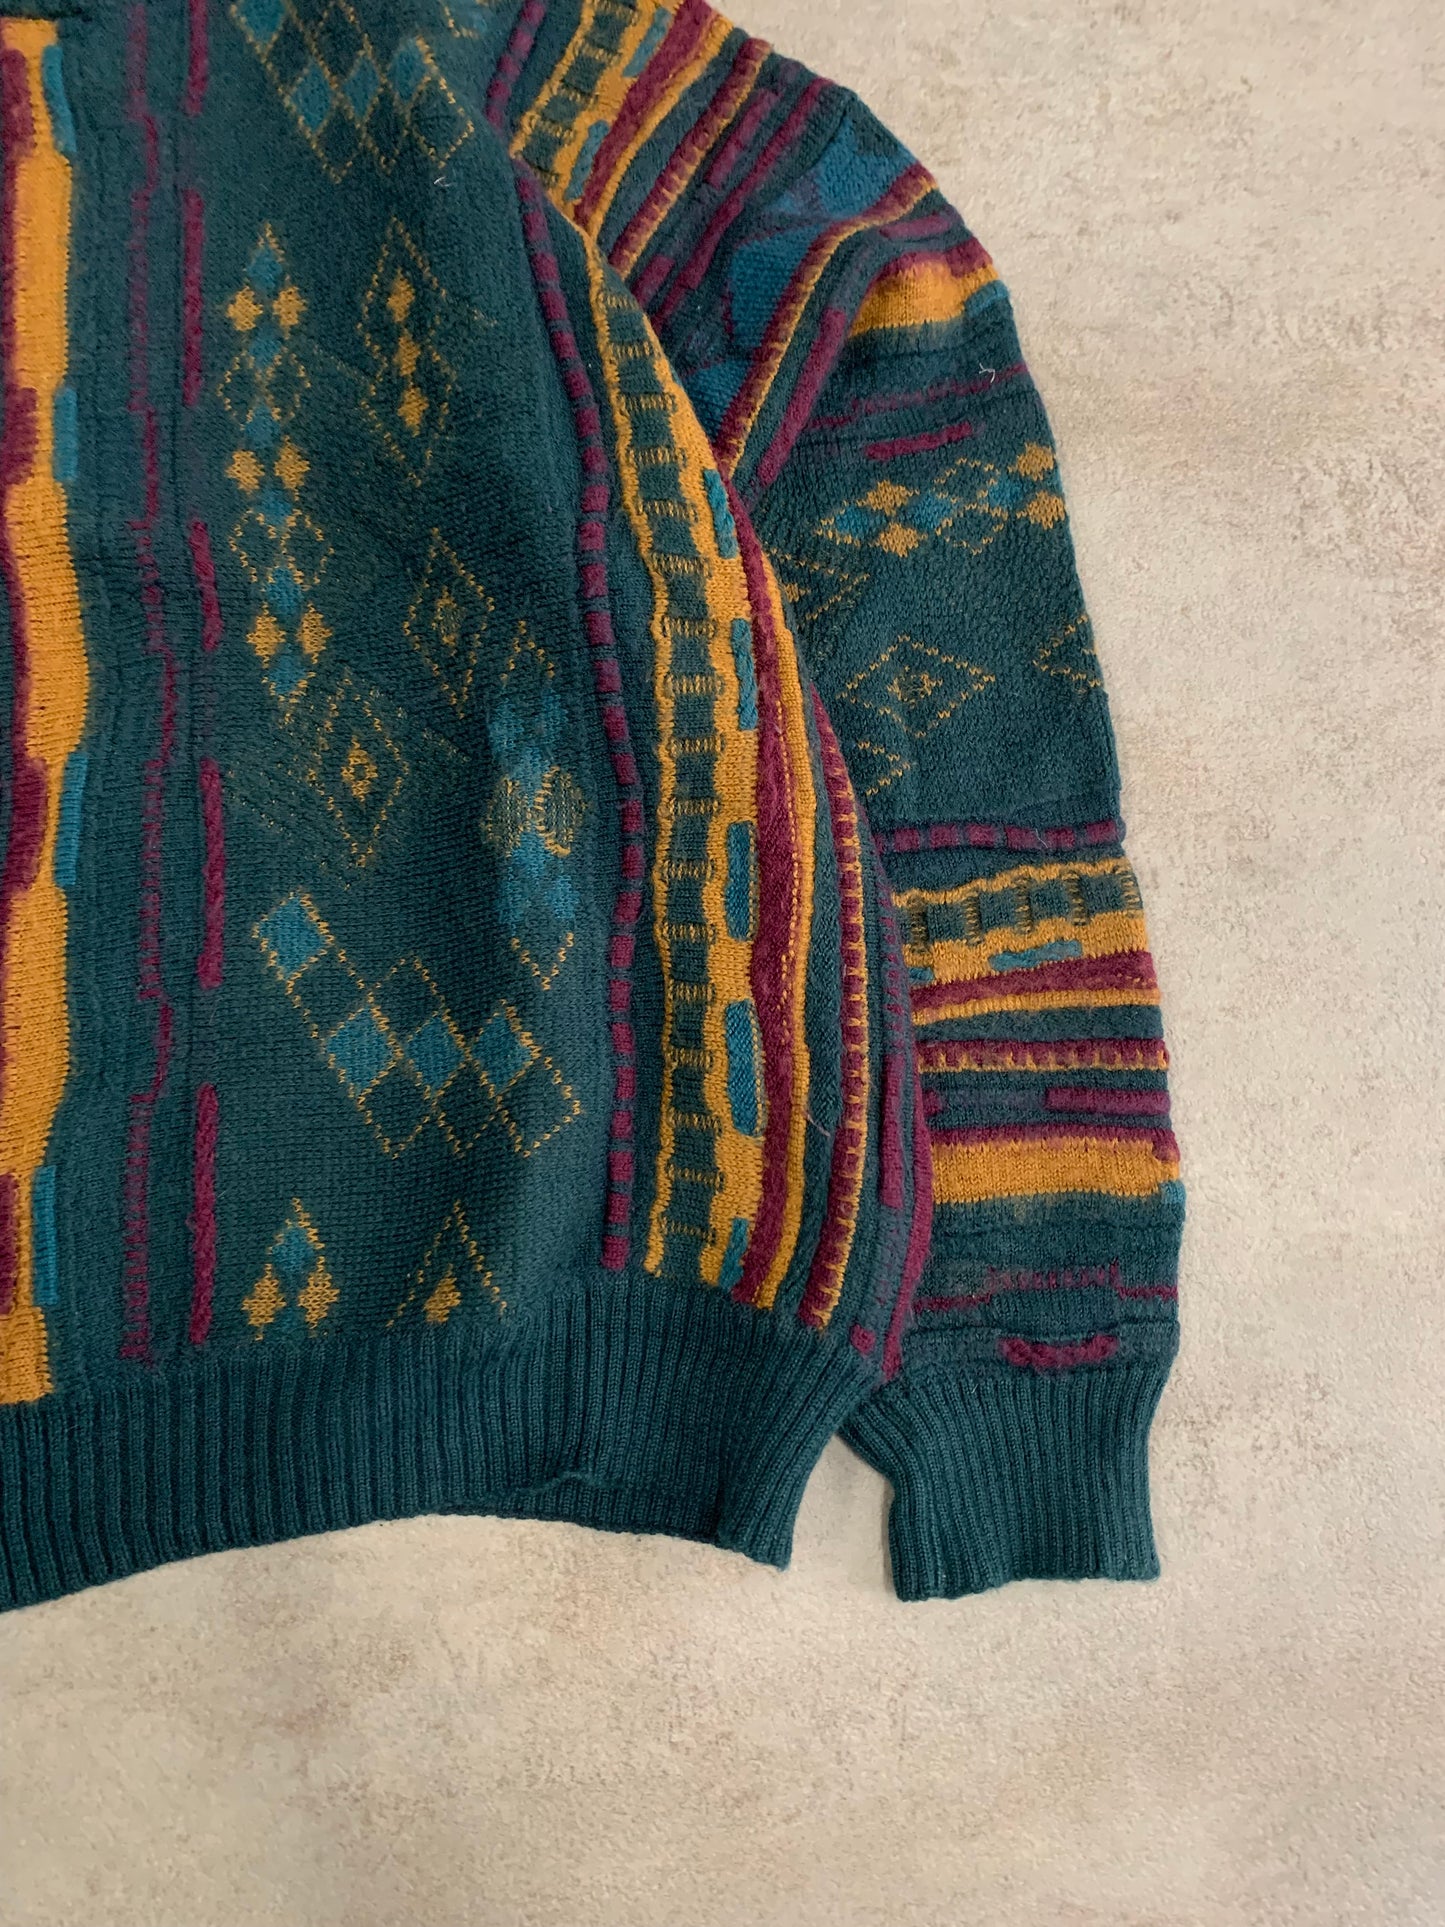 Vintage Wool Coogie Style Sweater - S